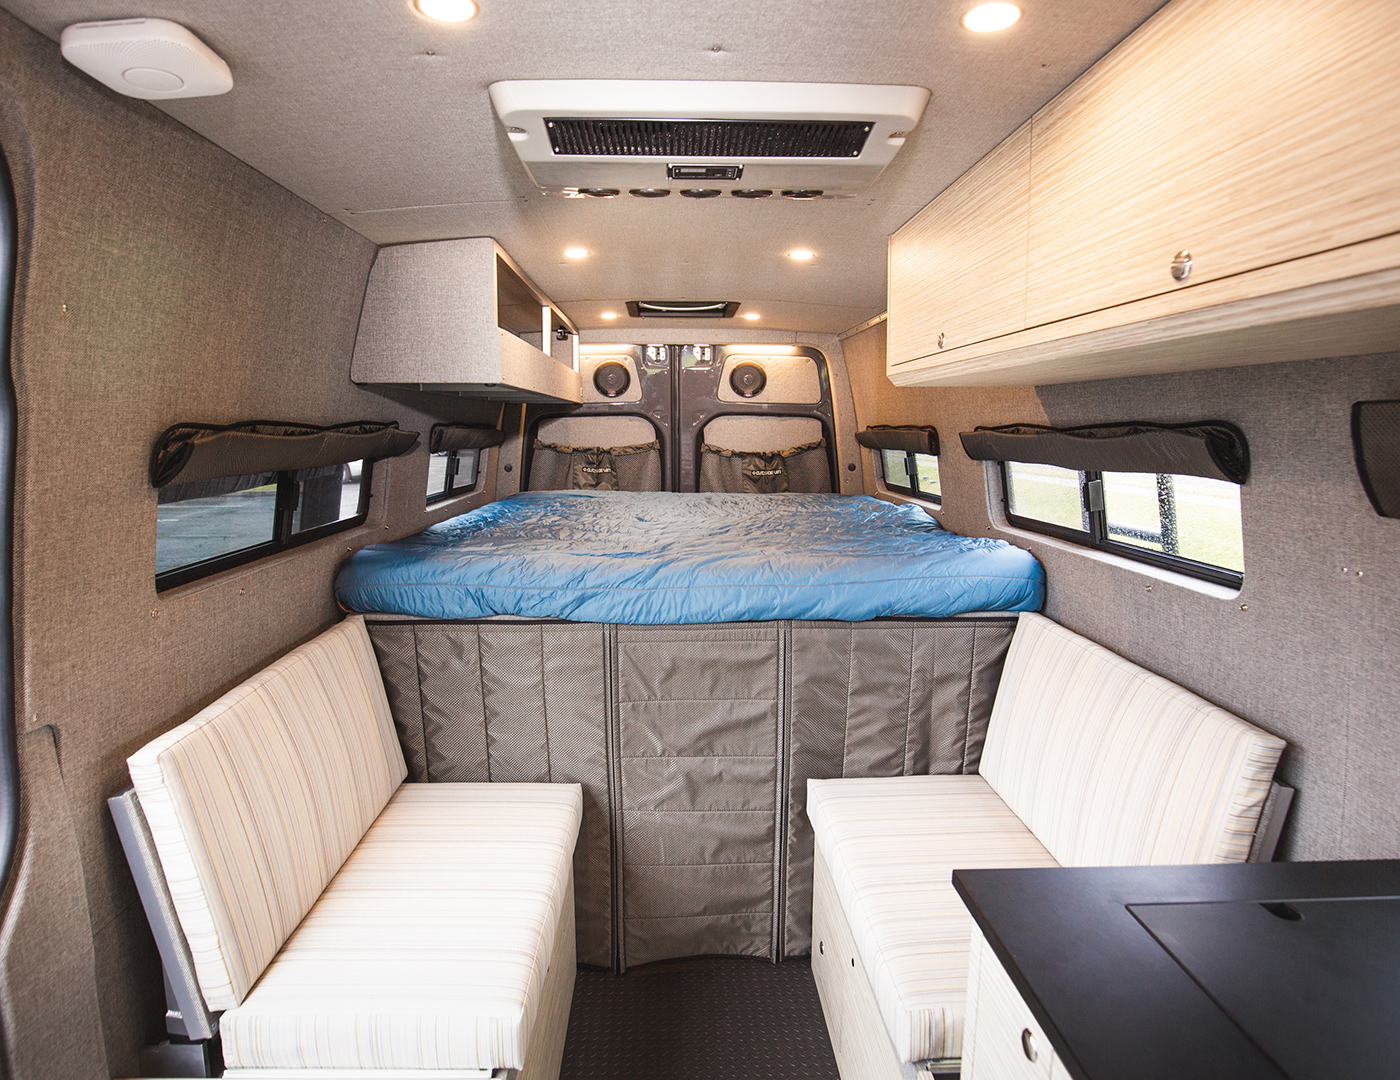 this 170" Ouside van, WyEast is seating and sleeping for 2 with a full galley and exterior shower